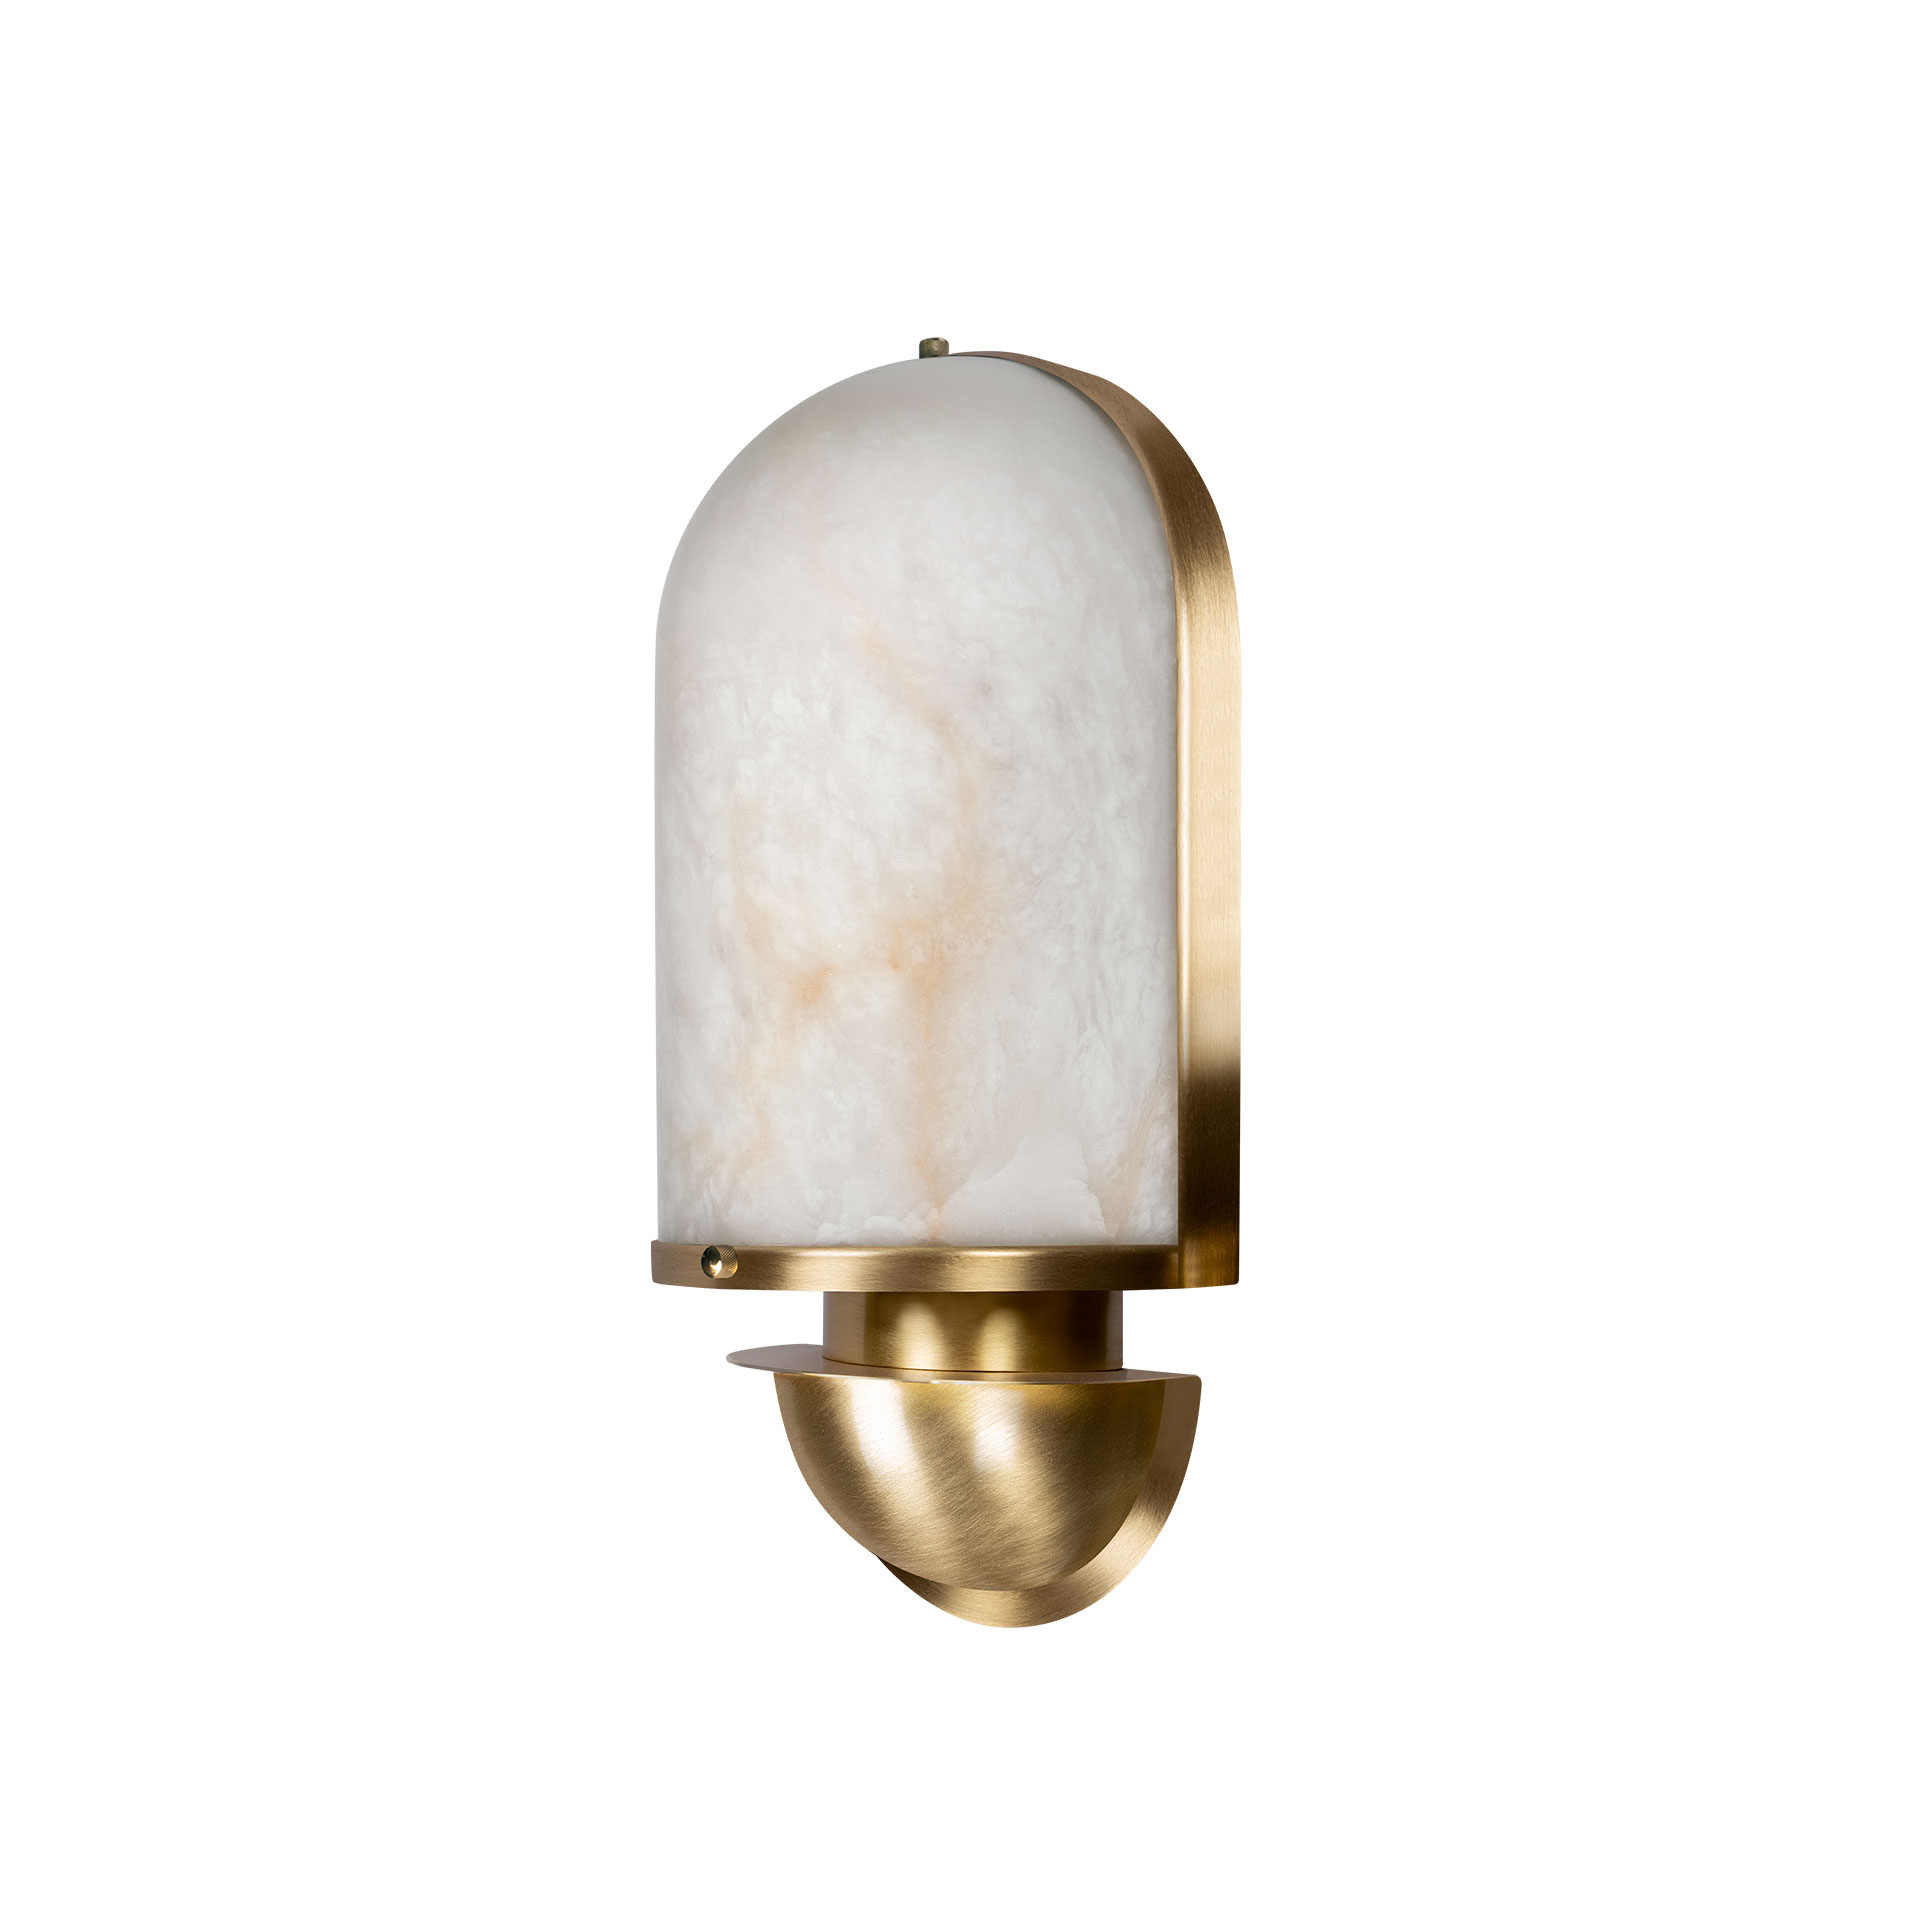 Russell i wall lamp